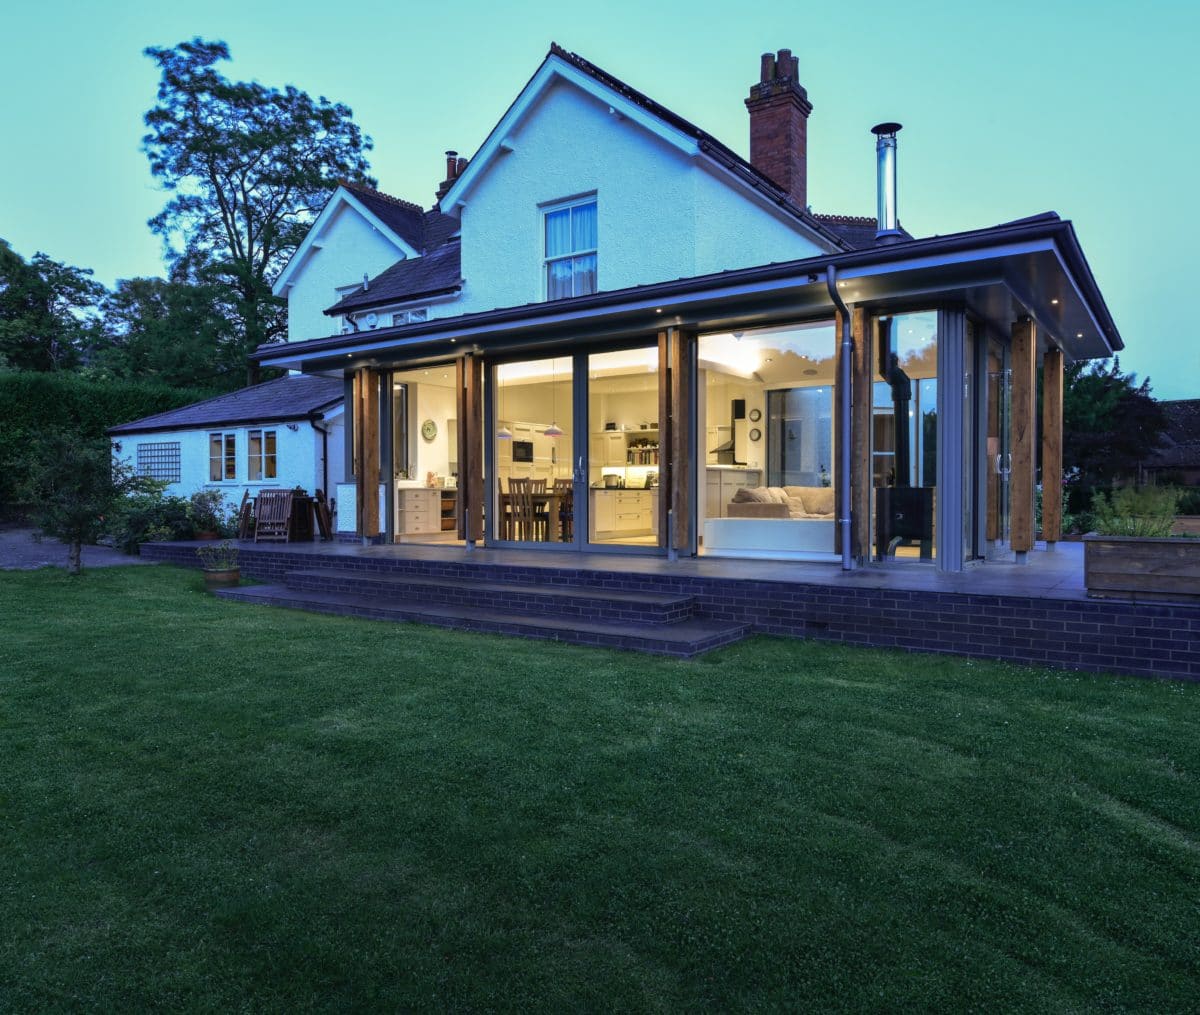 Exterior of home extension at twilight. The warm lighting inside the glazed extension brings focus to it, with the family dining room table inside, the original, white 1930s house rises behind. Communion Architects, Hereford.